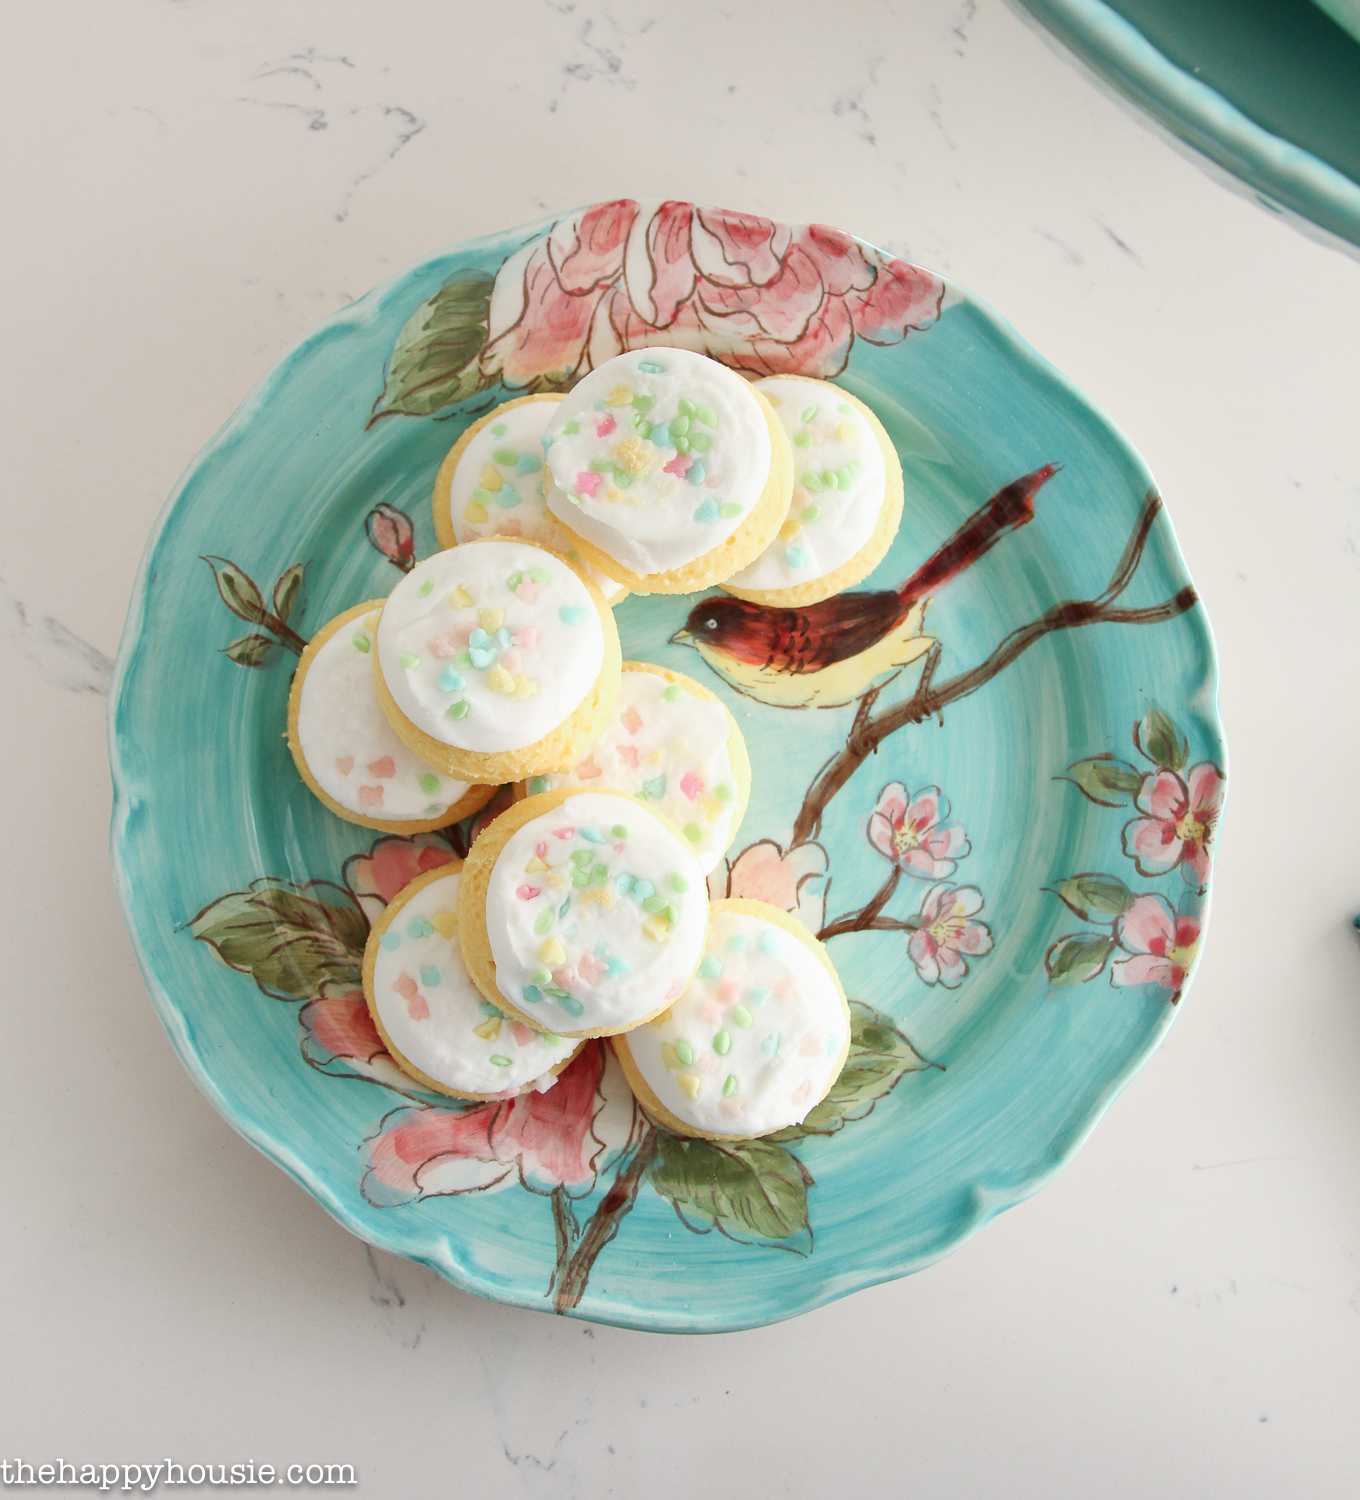 A blue, pink and floral/bird patterned plate with cookies on it.